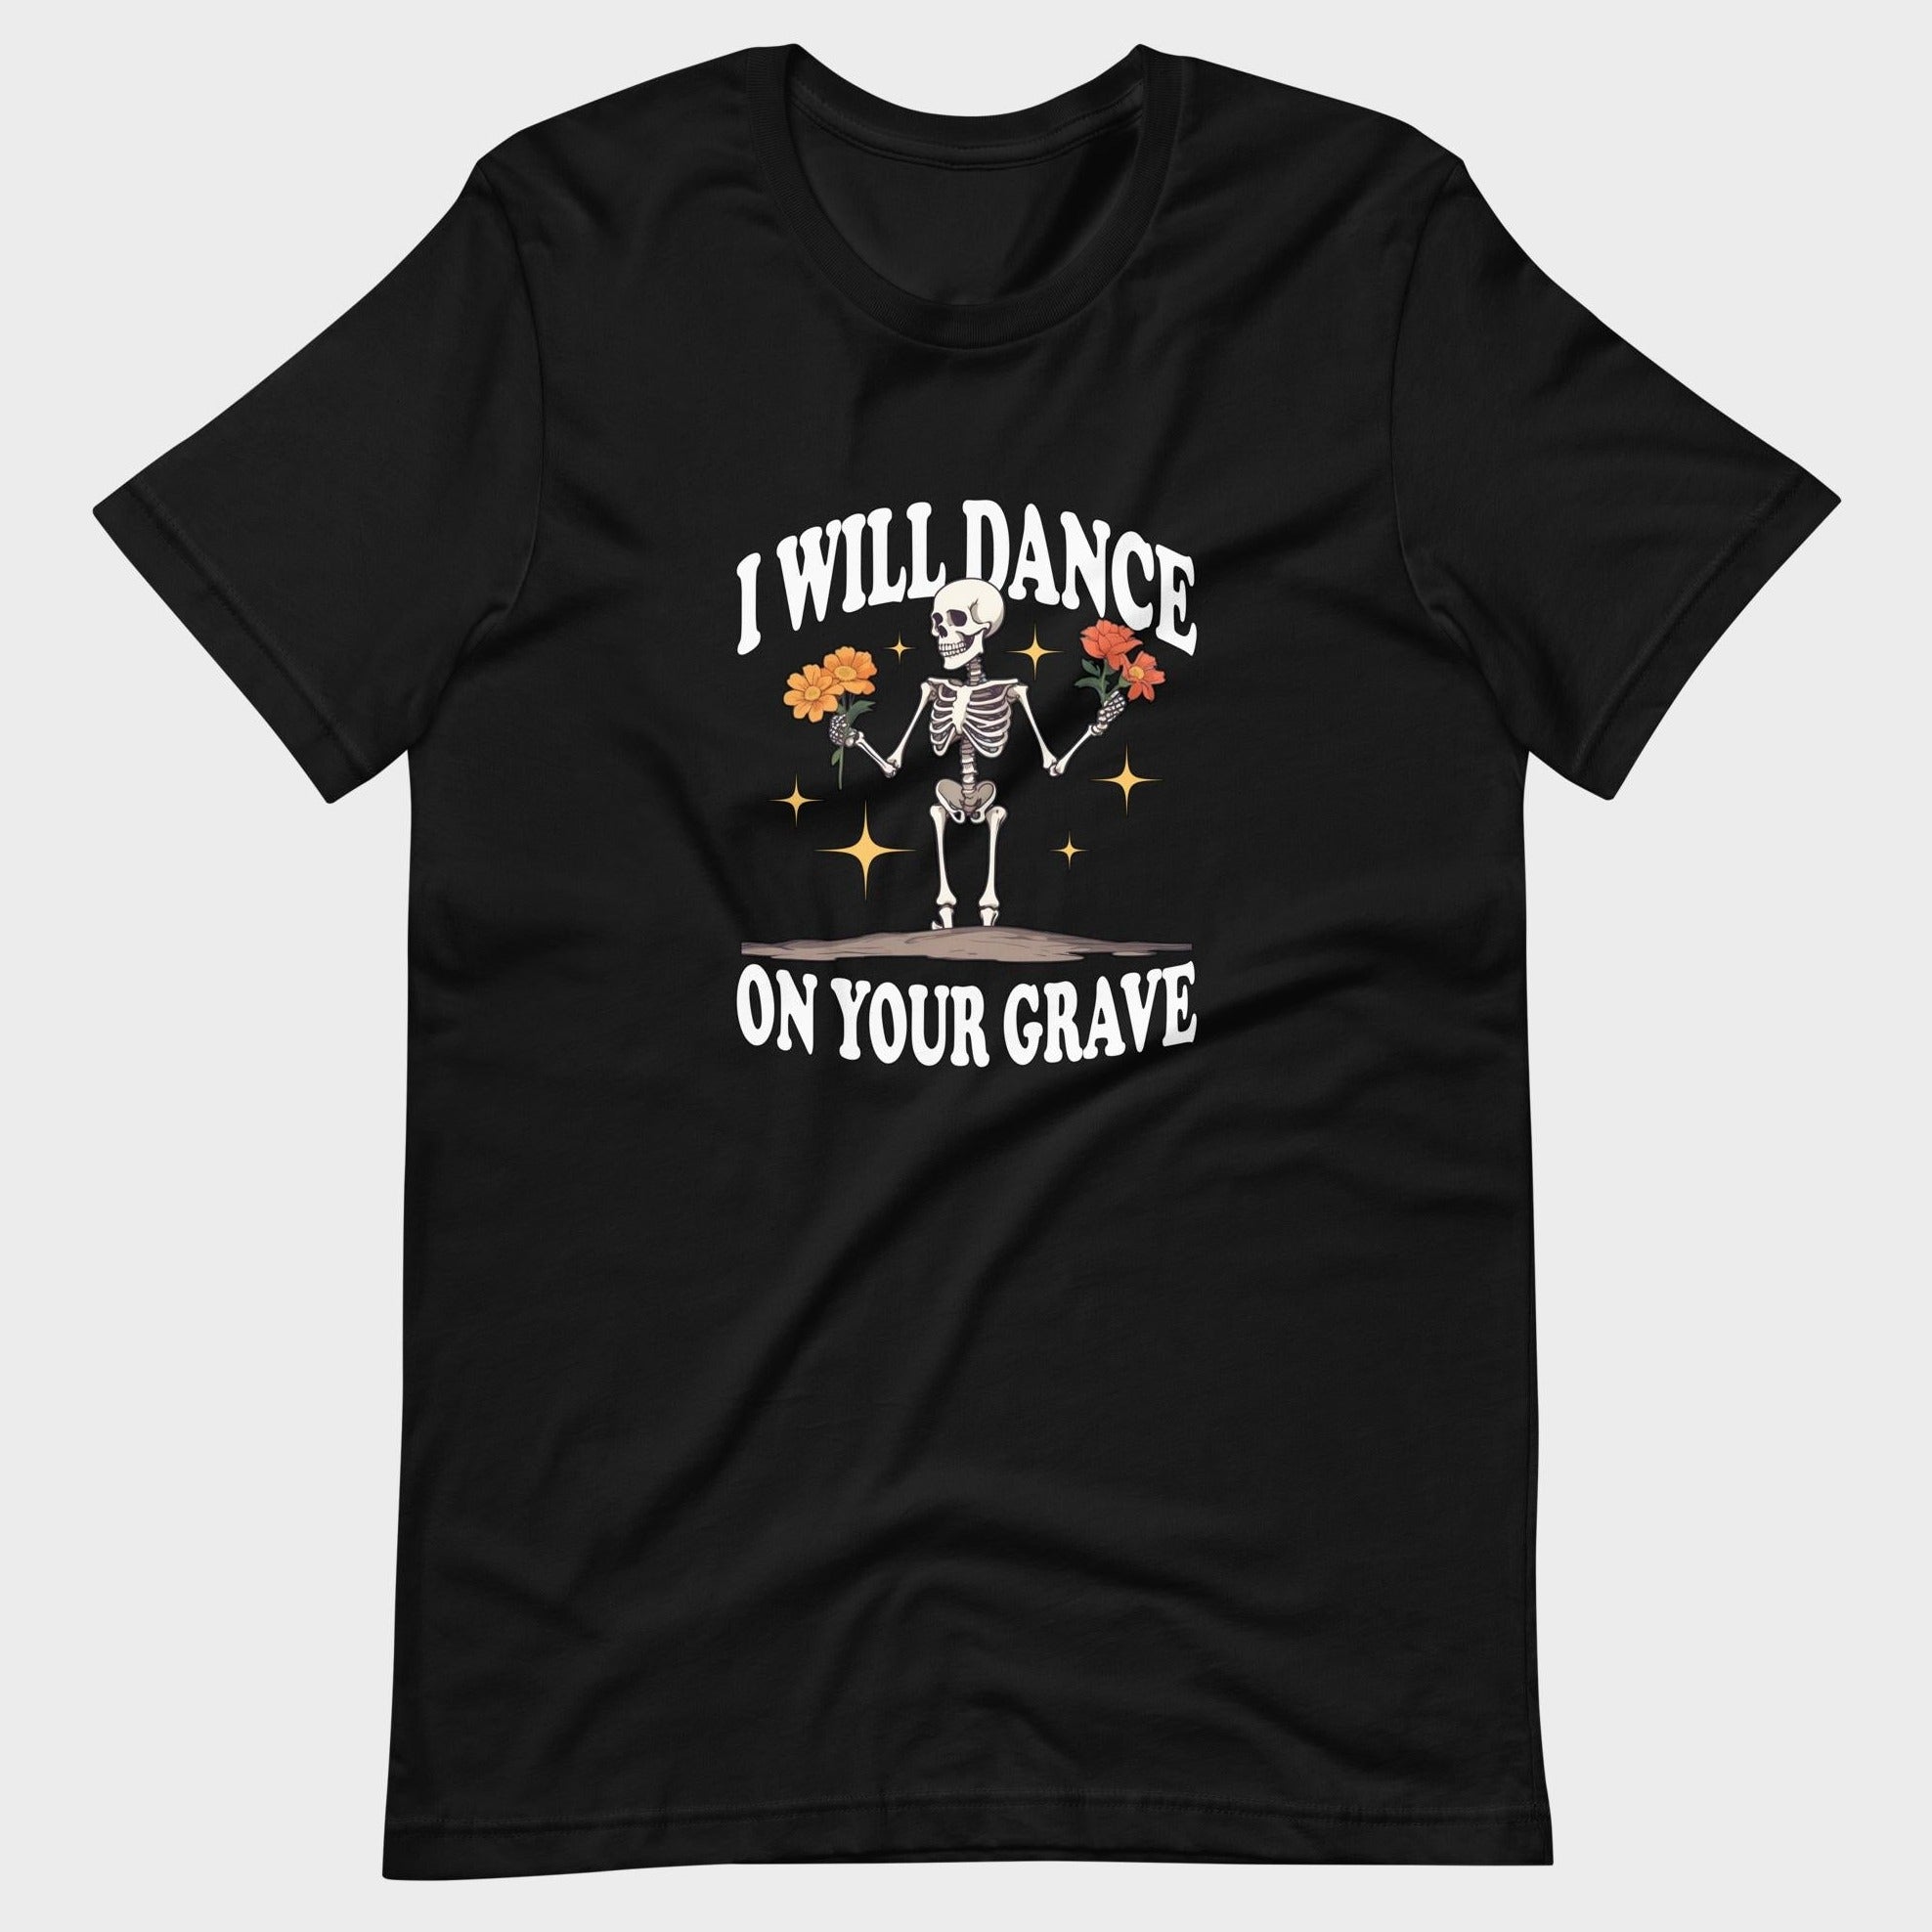 I Will Dance On Your Grave - T-Shirt